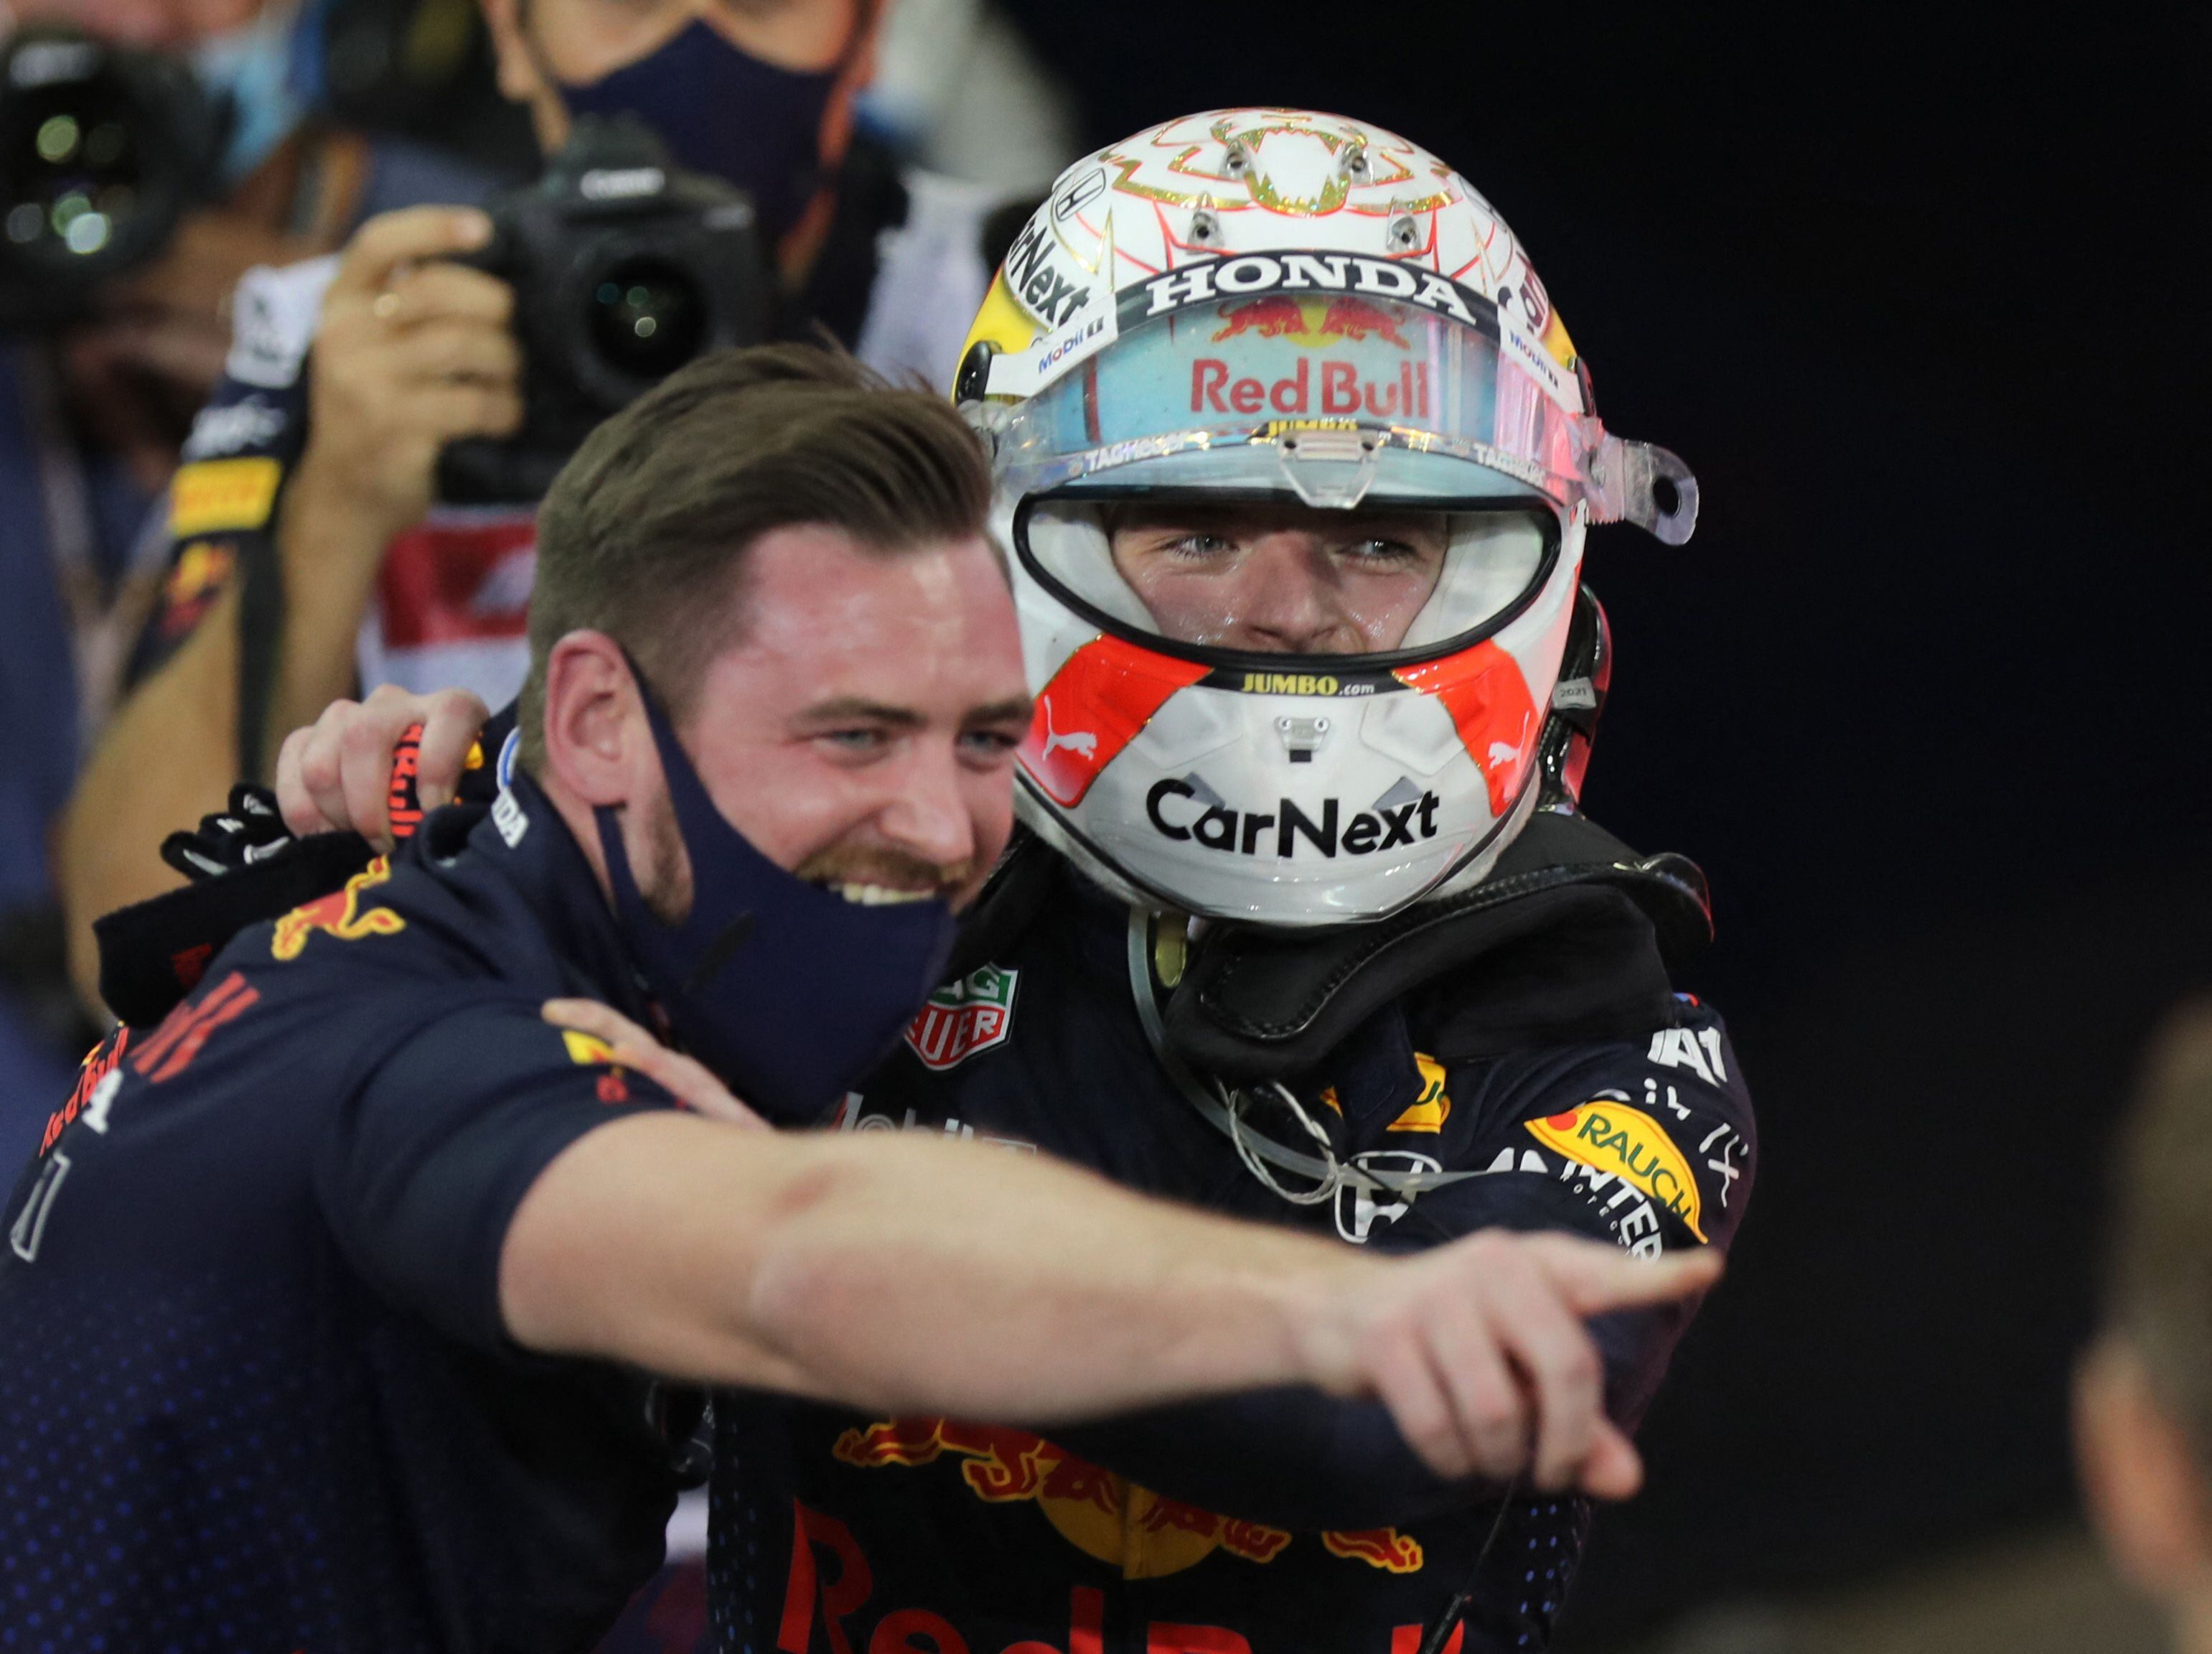 Verstappen crossed the checkered flag and became champion